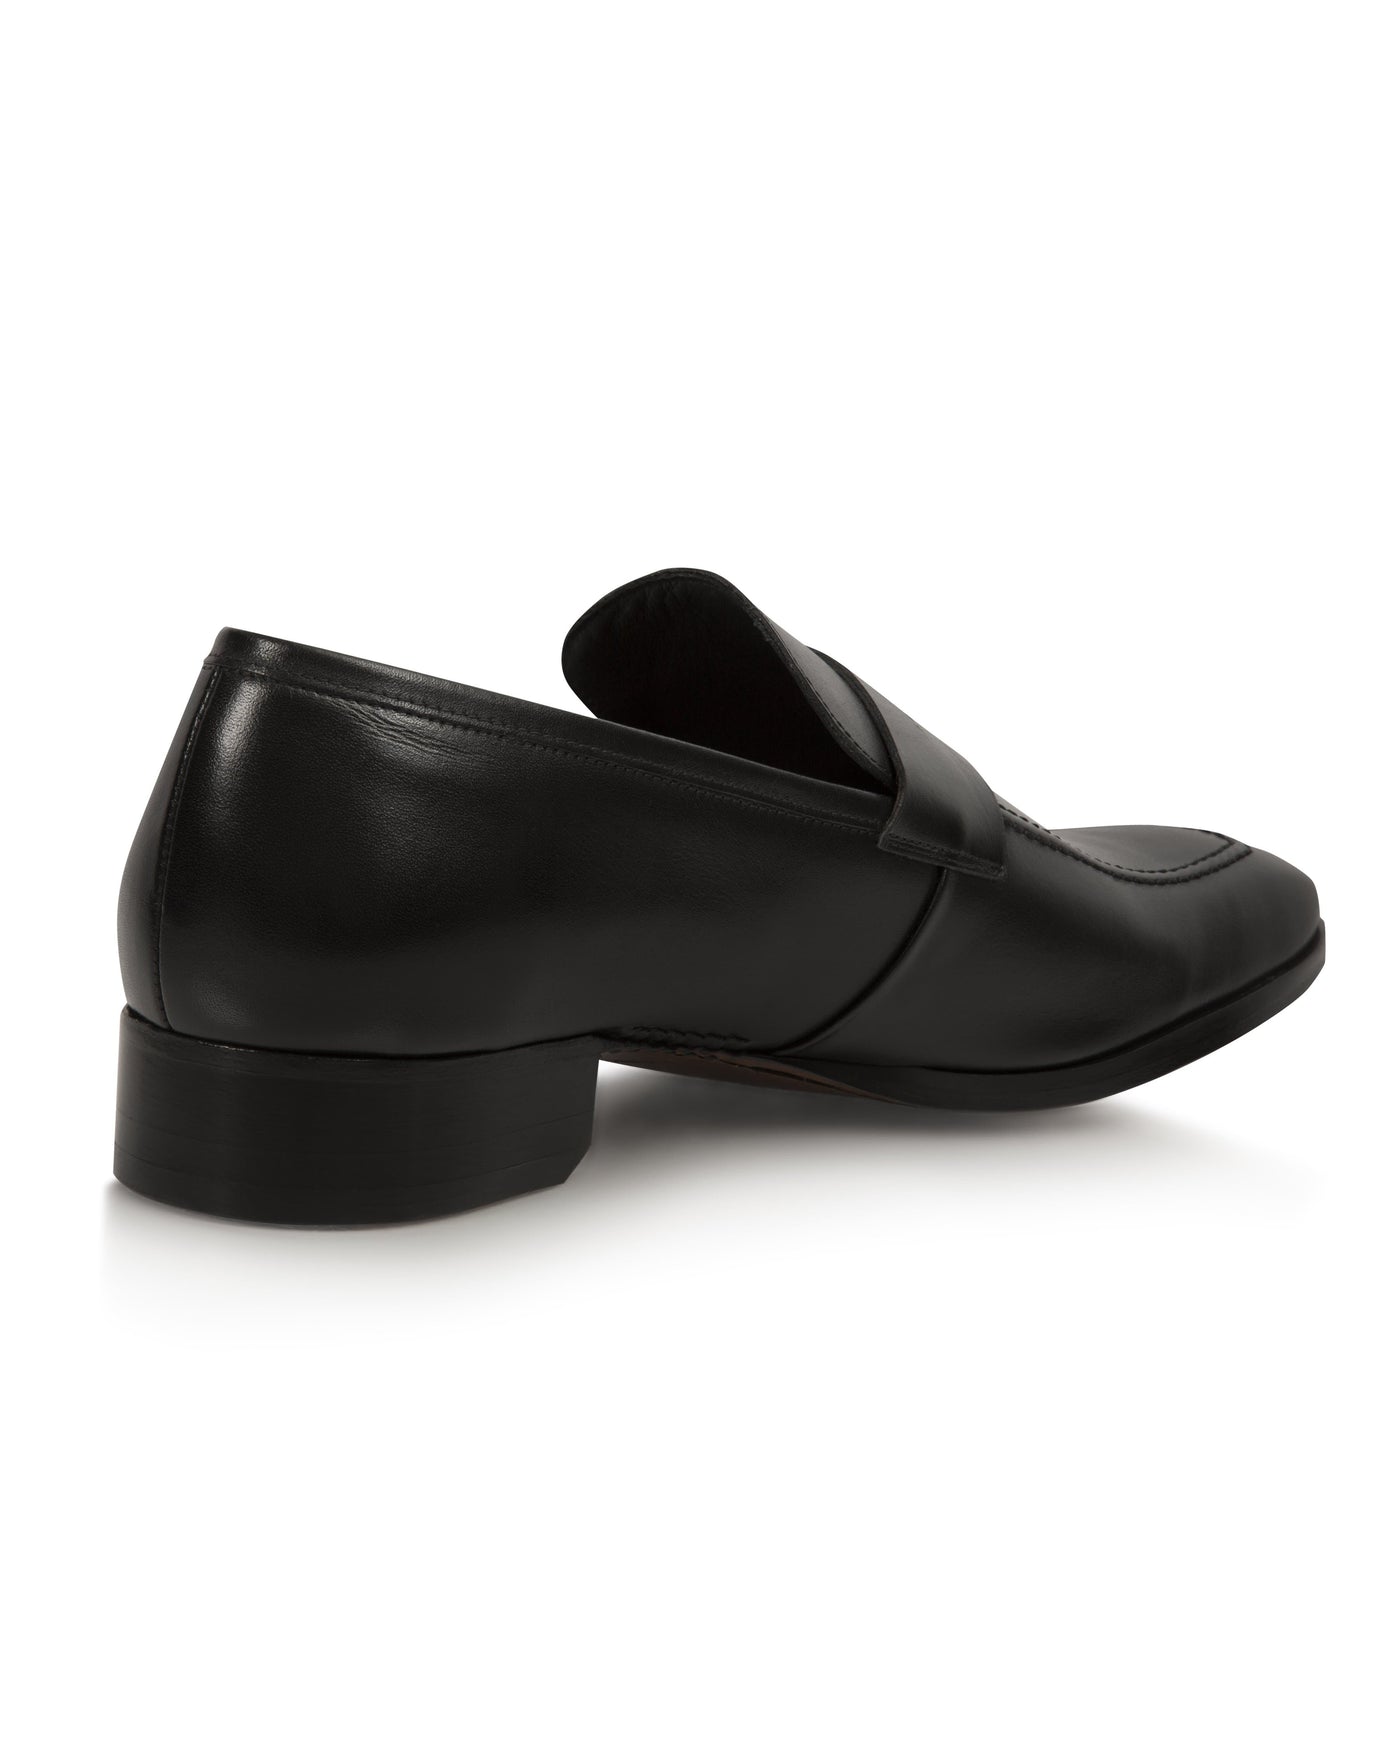 Black Hand-Stitched Penny Loafer